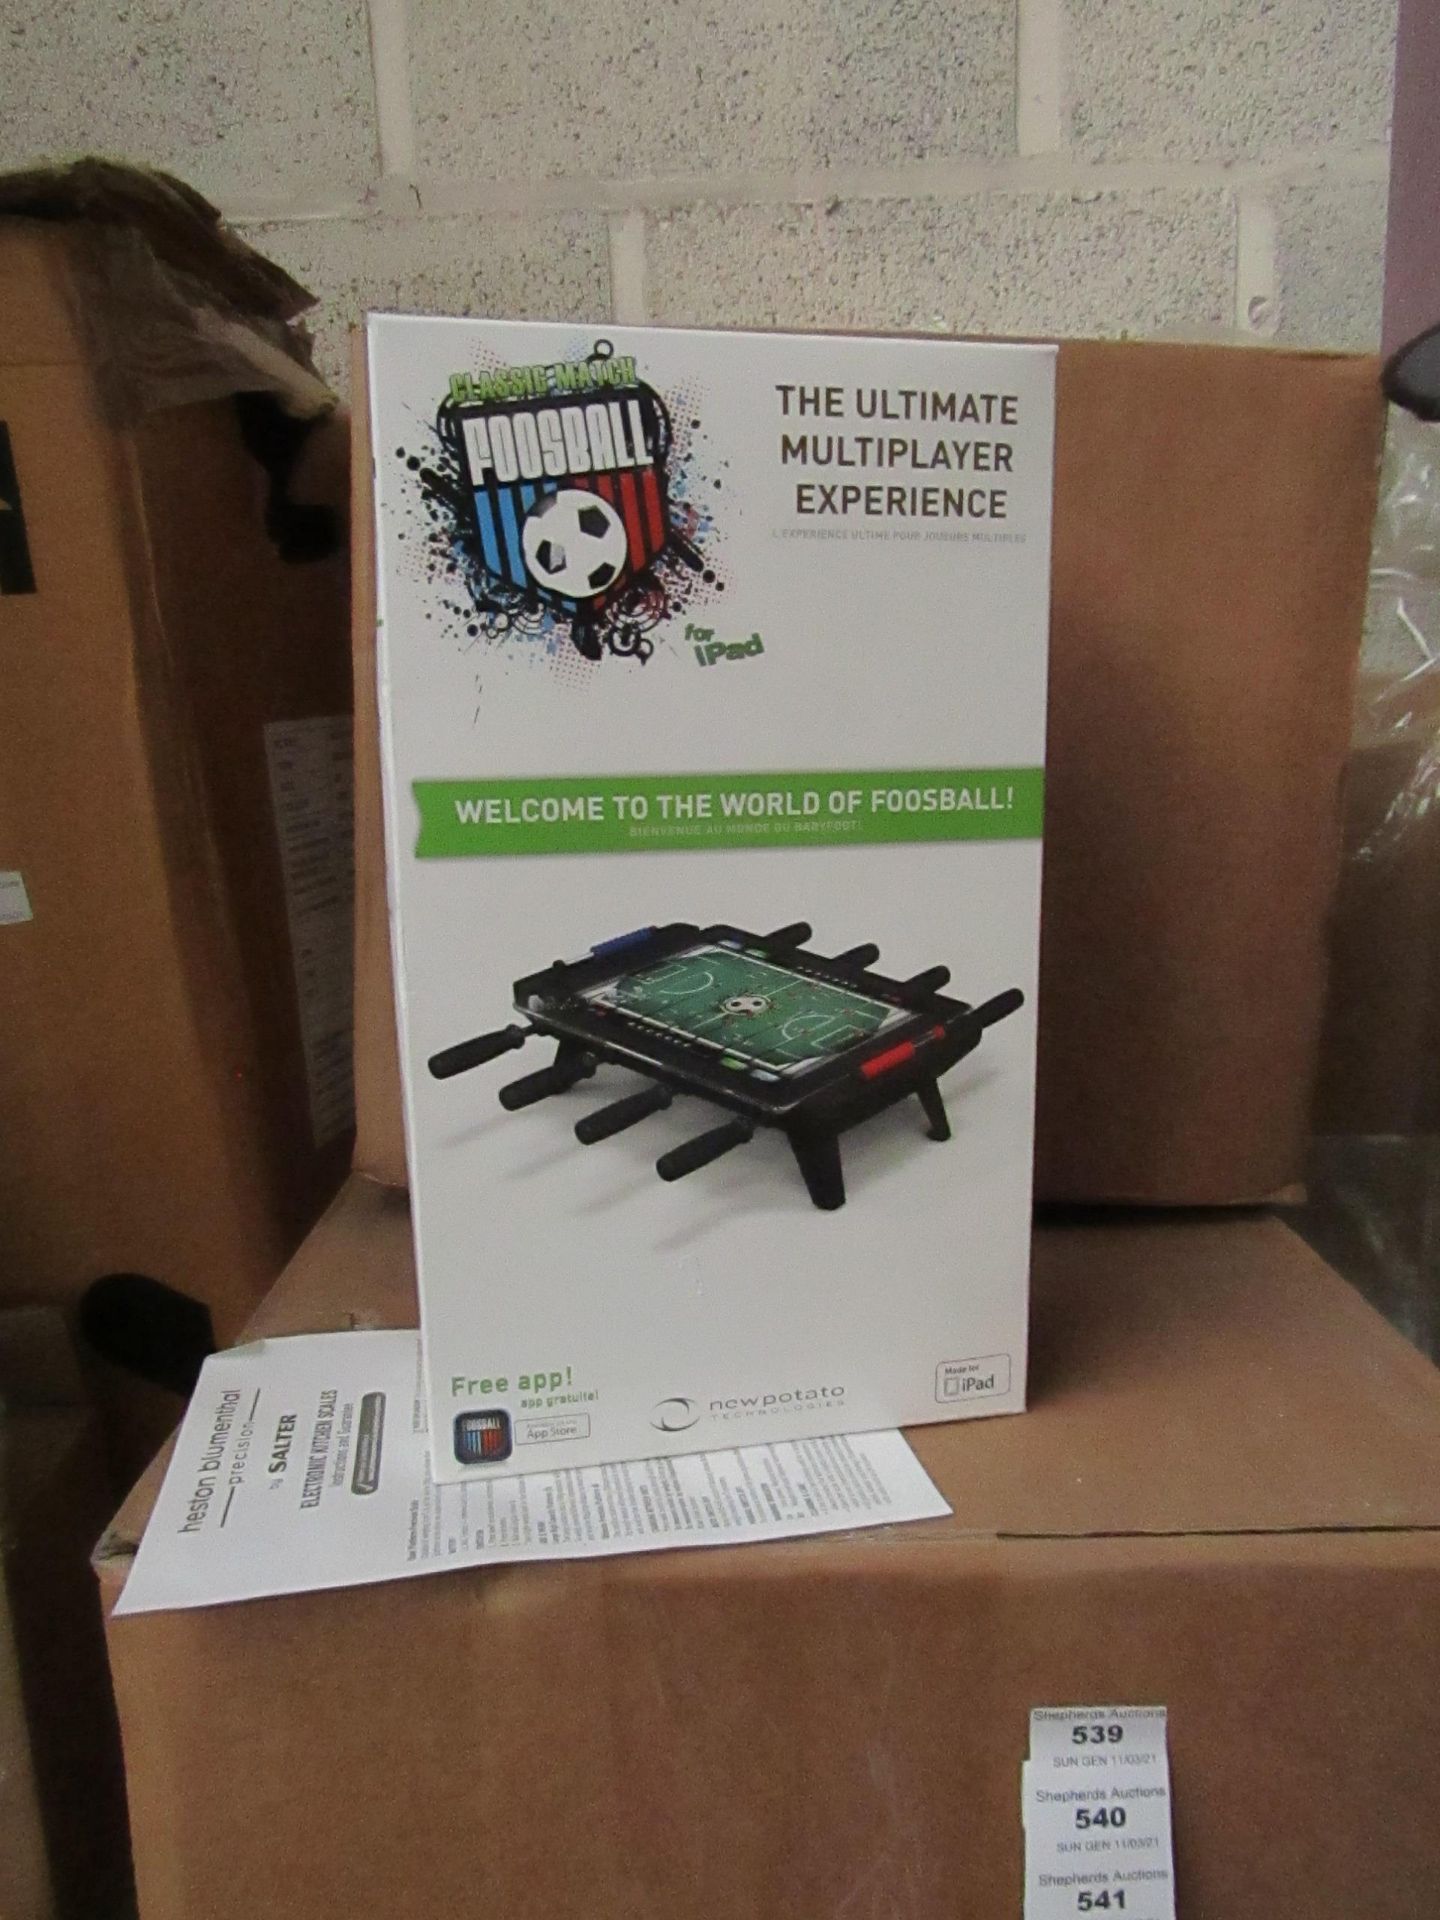 2x Foosball Realistic Football Game Table for your iPad, you insert you iPad into the case to make